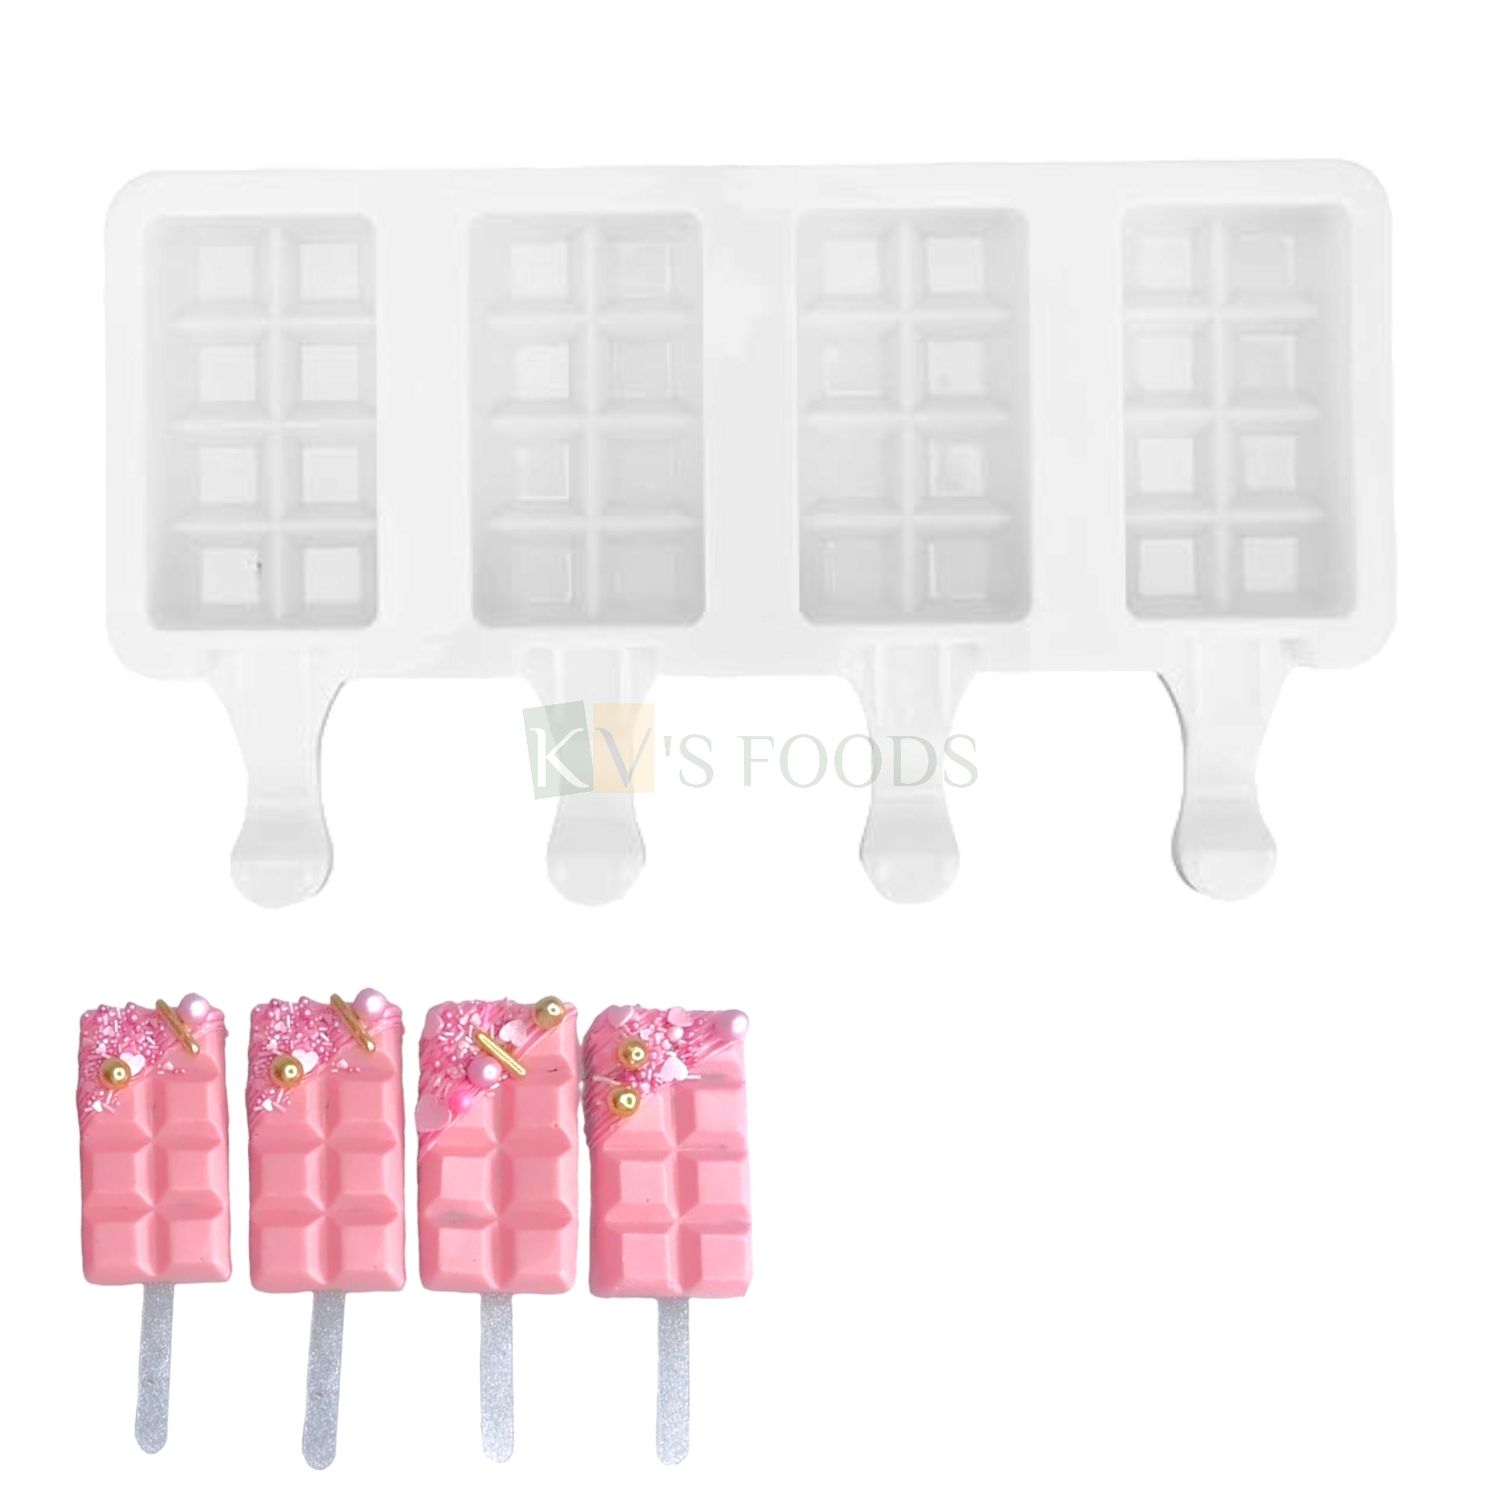 4 Cavity Chocolate Bar Shape Cakesicle, Popsicle, Ice Pop Silicon Mould, Chocolate, Ice Cream, Candies, Kulfi, Cakes, Dessert Mold, Ice Bar, Ice Cubes for Homes, Kitchen DIY Cake Decorations